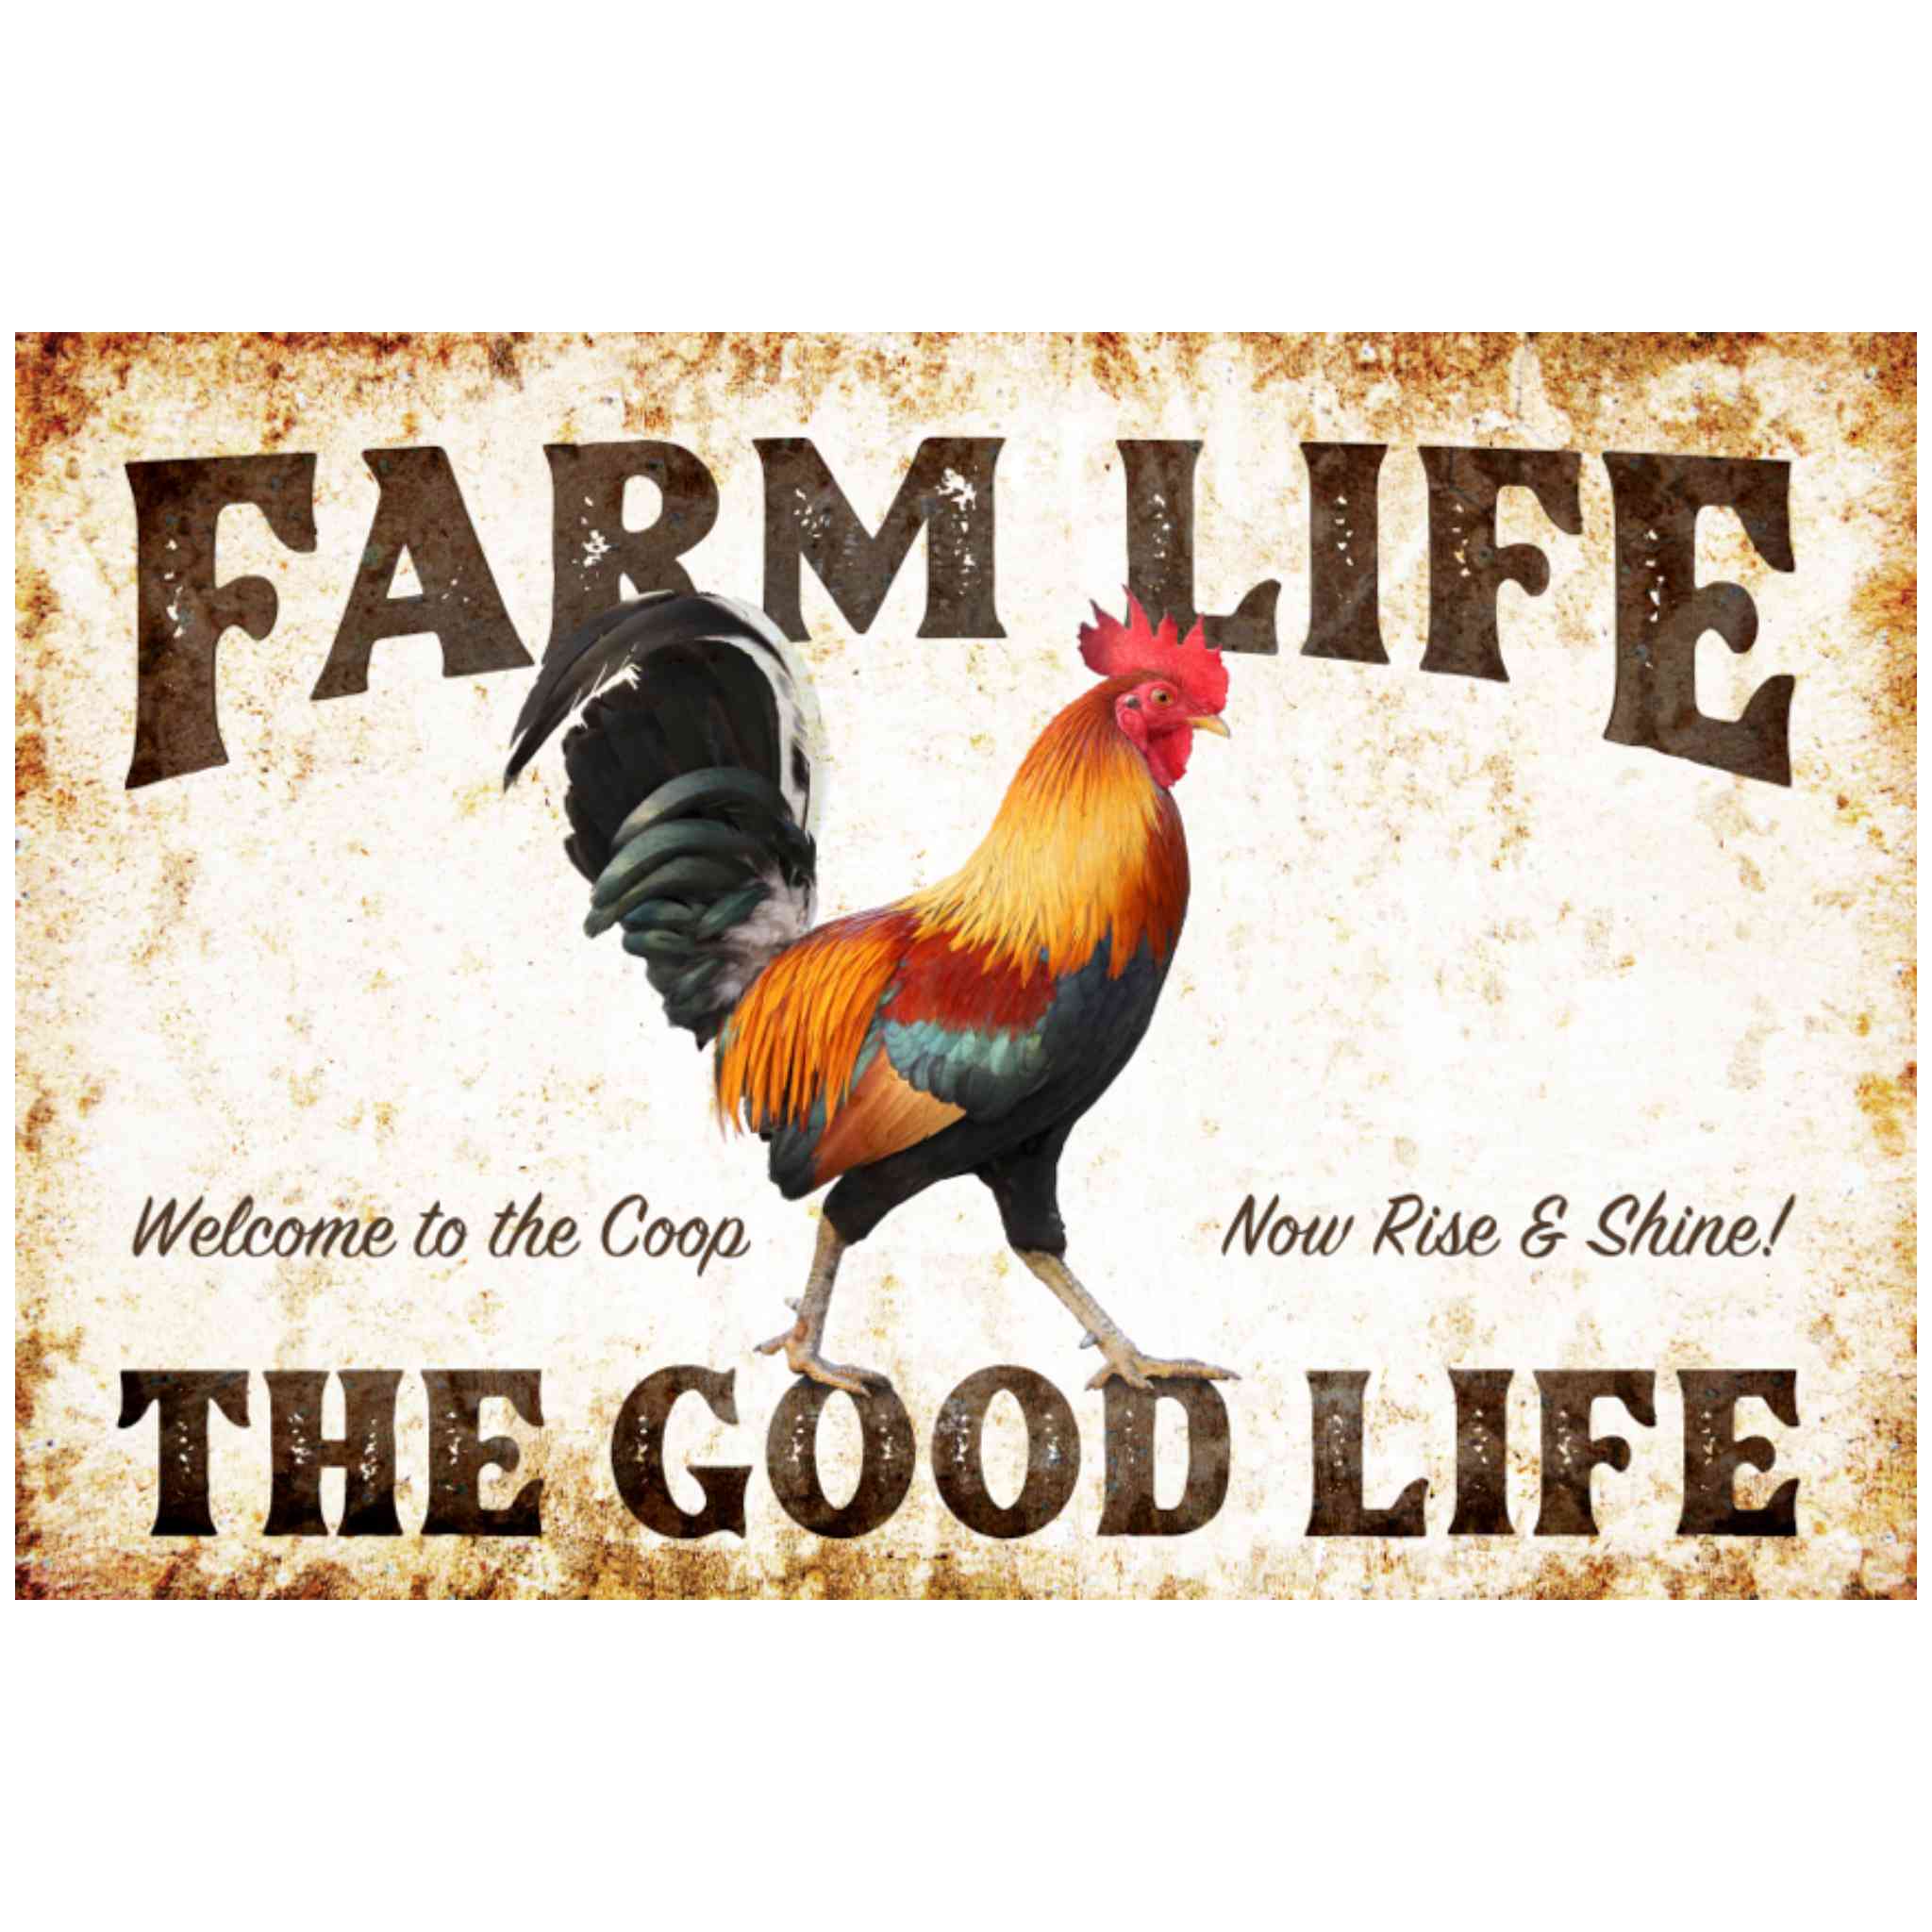 Farm Life - Rooster (Red) - Farmhouse Wall Decor - Metal Sign